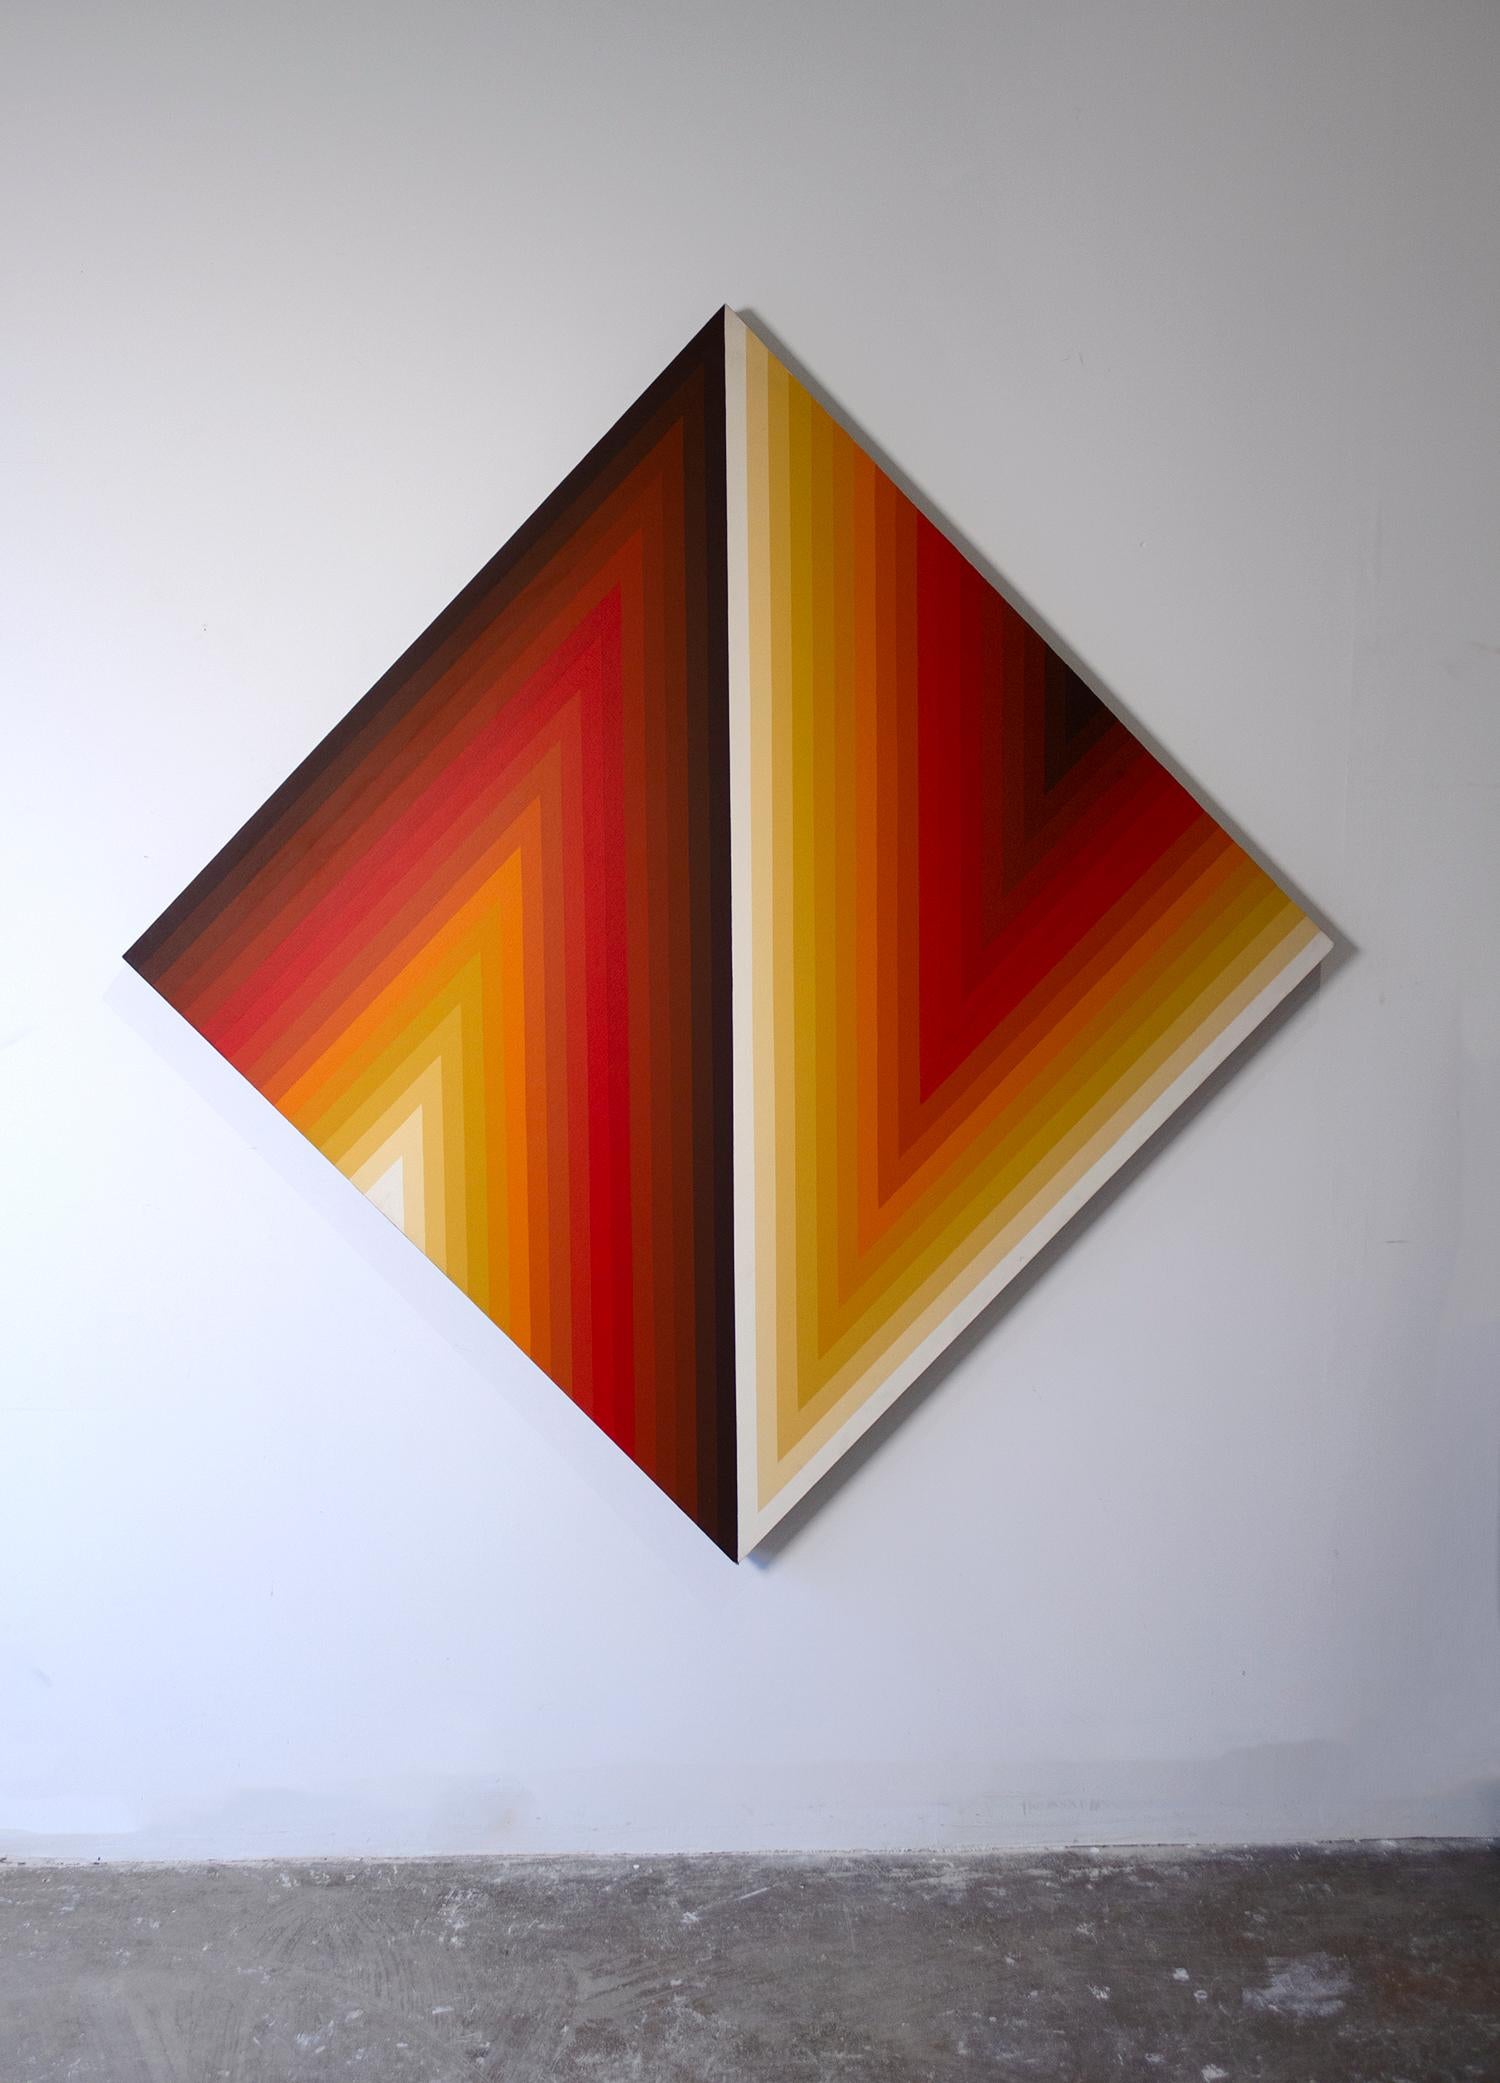 This painting was commissioned by a prominent modernist family in Connecticut by hard-edge painter Walt Hines in the early 1970s. Designed to hang on the diamond as shown but could be made to hang perpendicular.